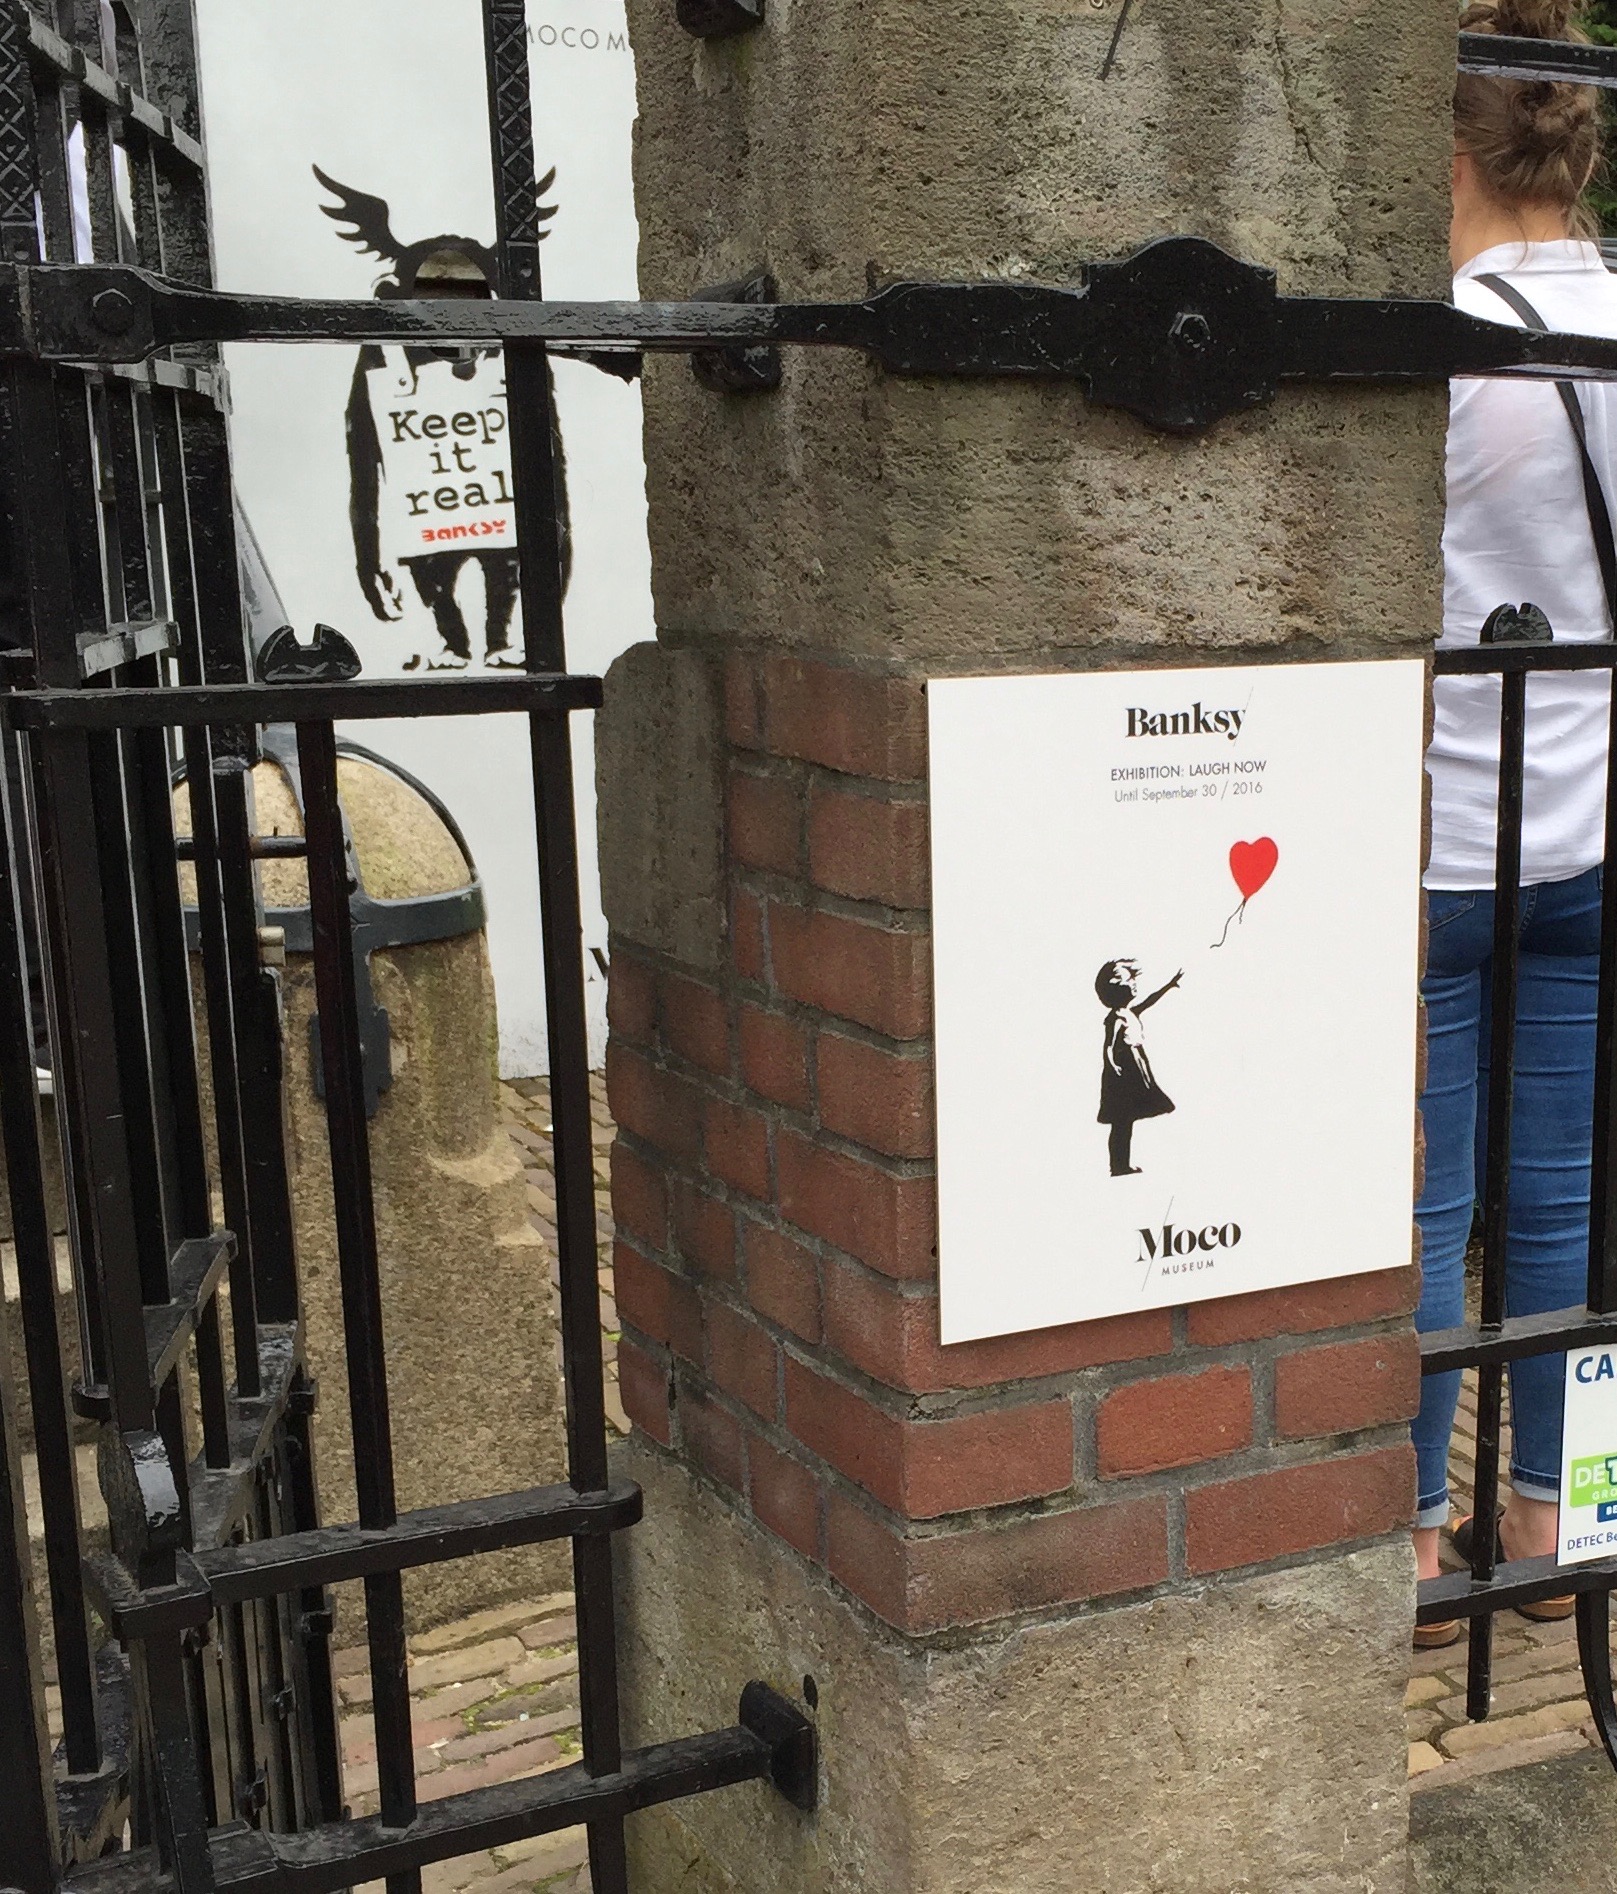 Moco Museum Banksy little girl with a heart balloon sign on the fence post outside of the museum in Amsterdam